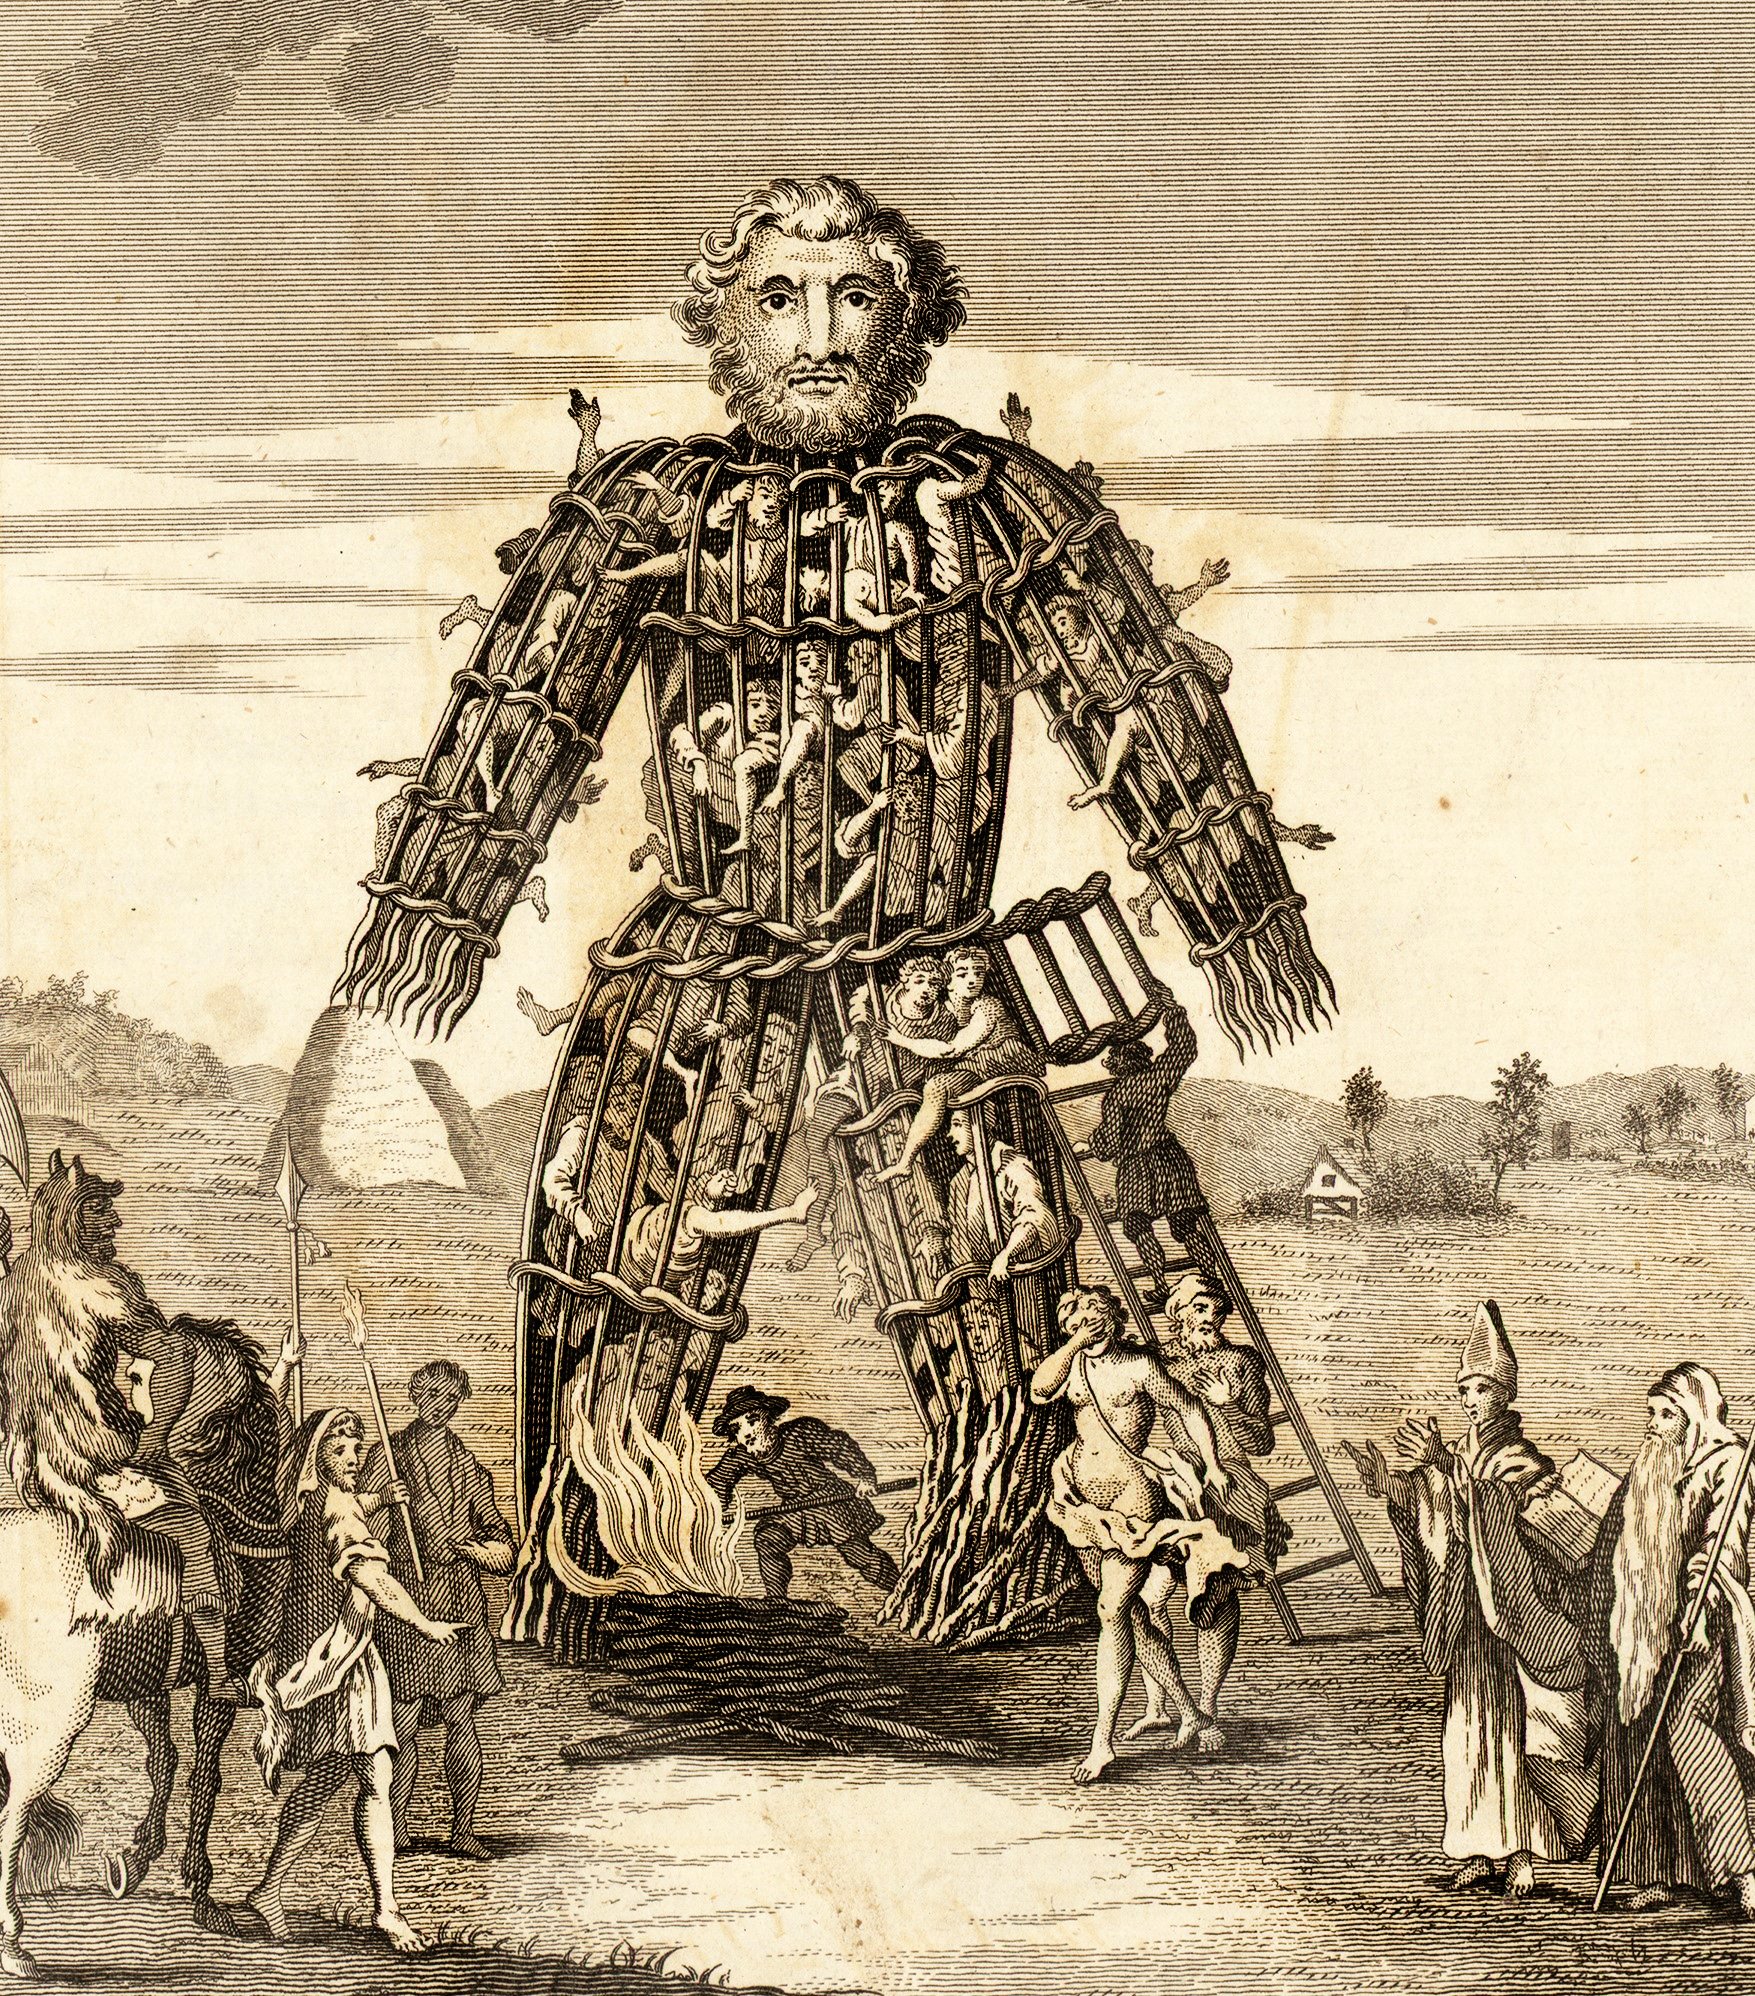 An illustration from 'Duncan Caesar' showing a wicker man, a towering effigy made of woven branches, representing the druidic execution method for human sacrifice as detailed by Caesar.